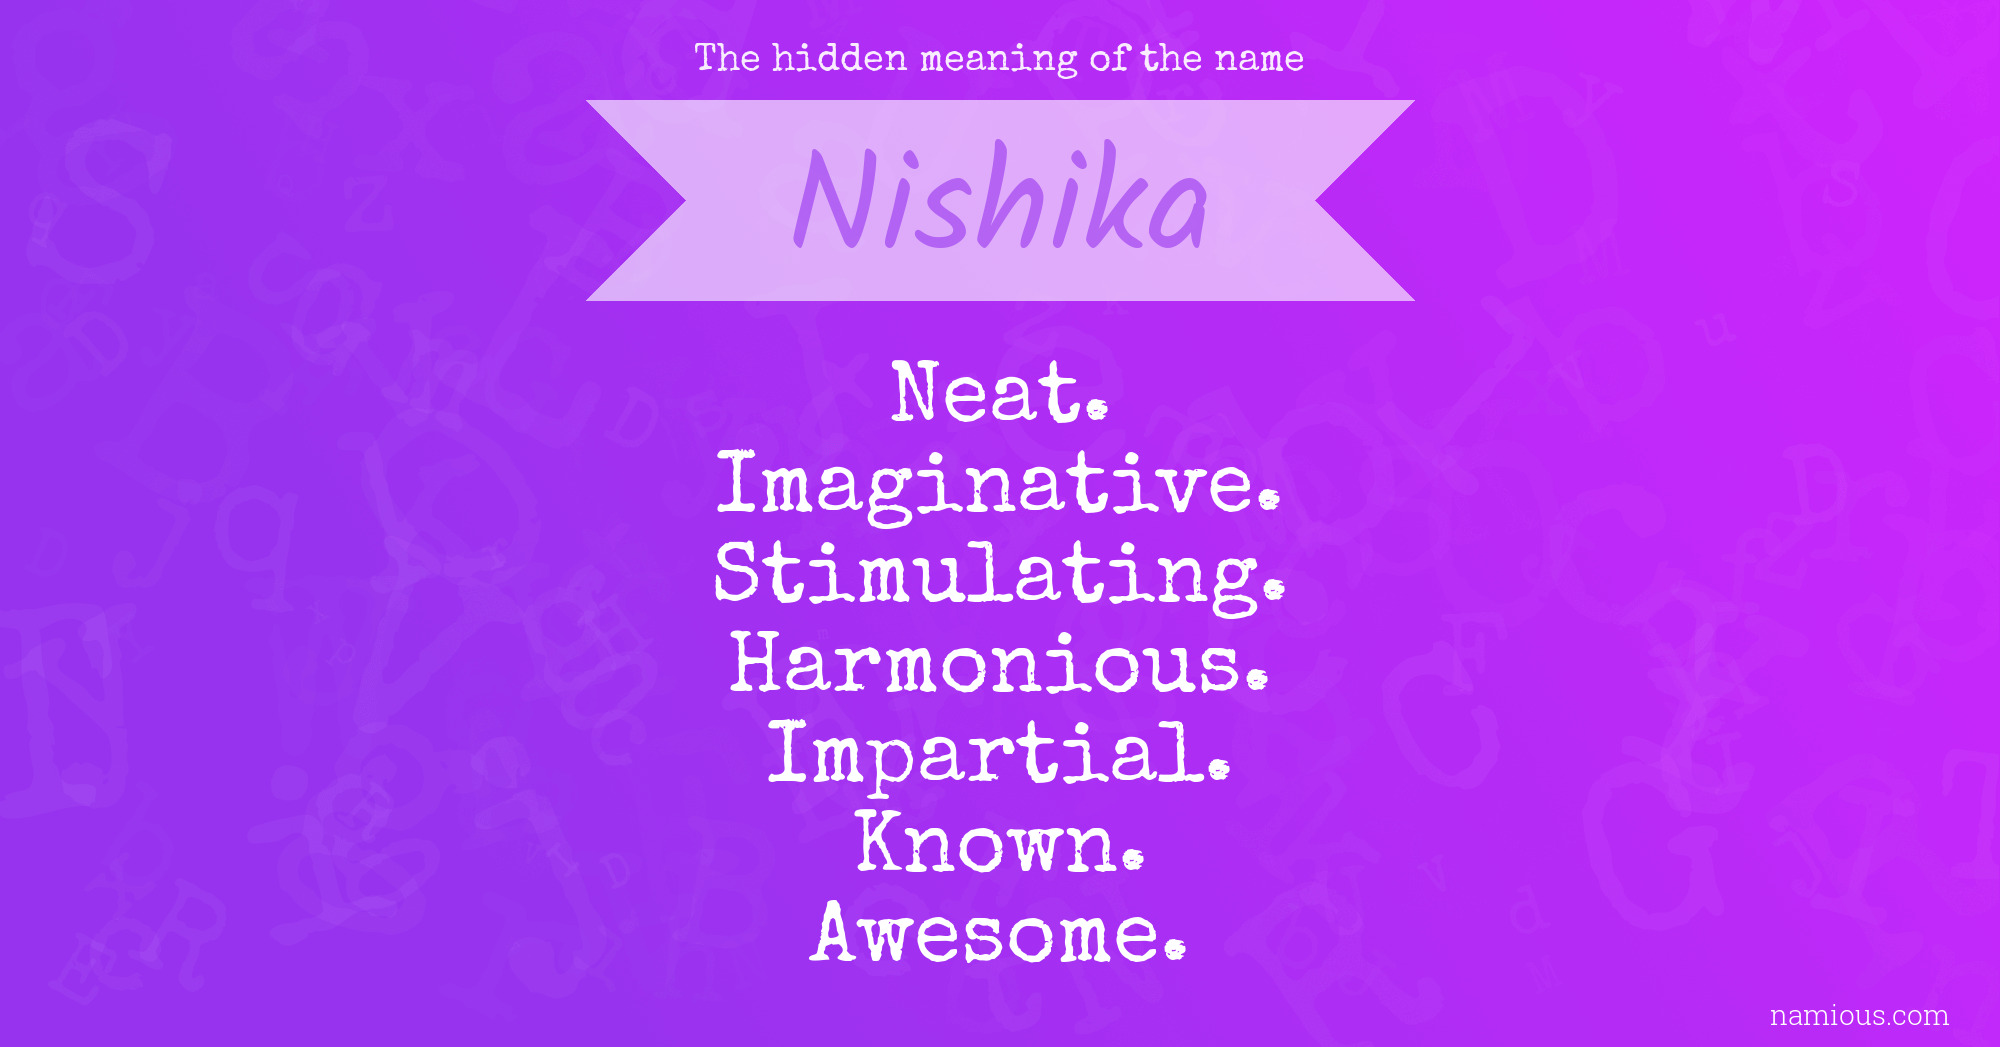 The hidden meaning of the name Nishika